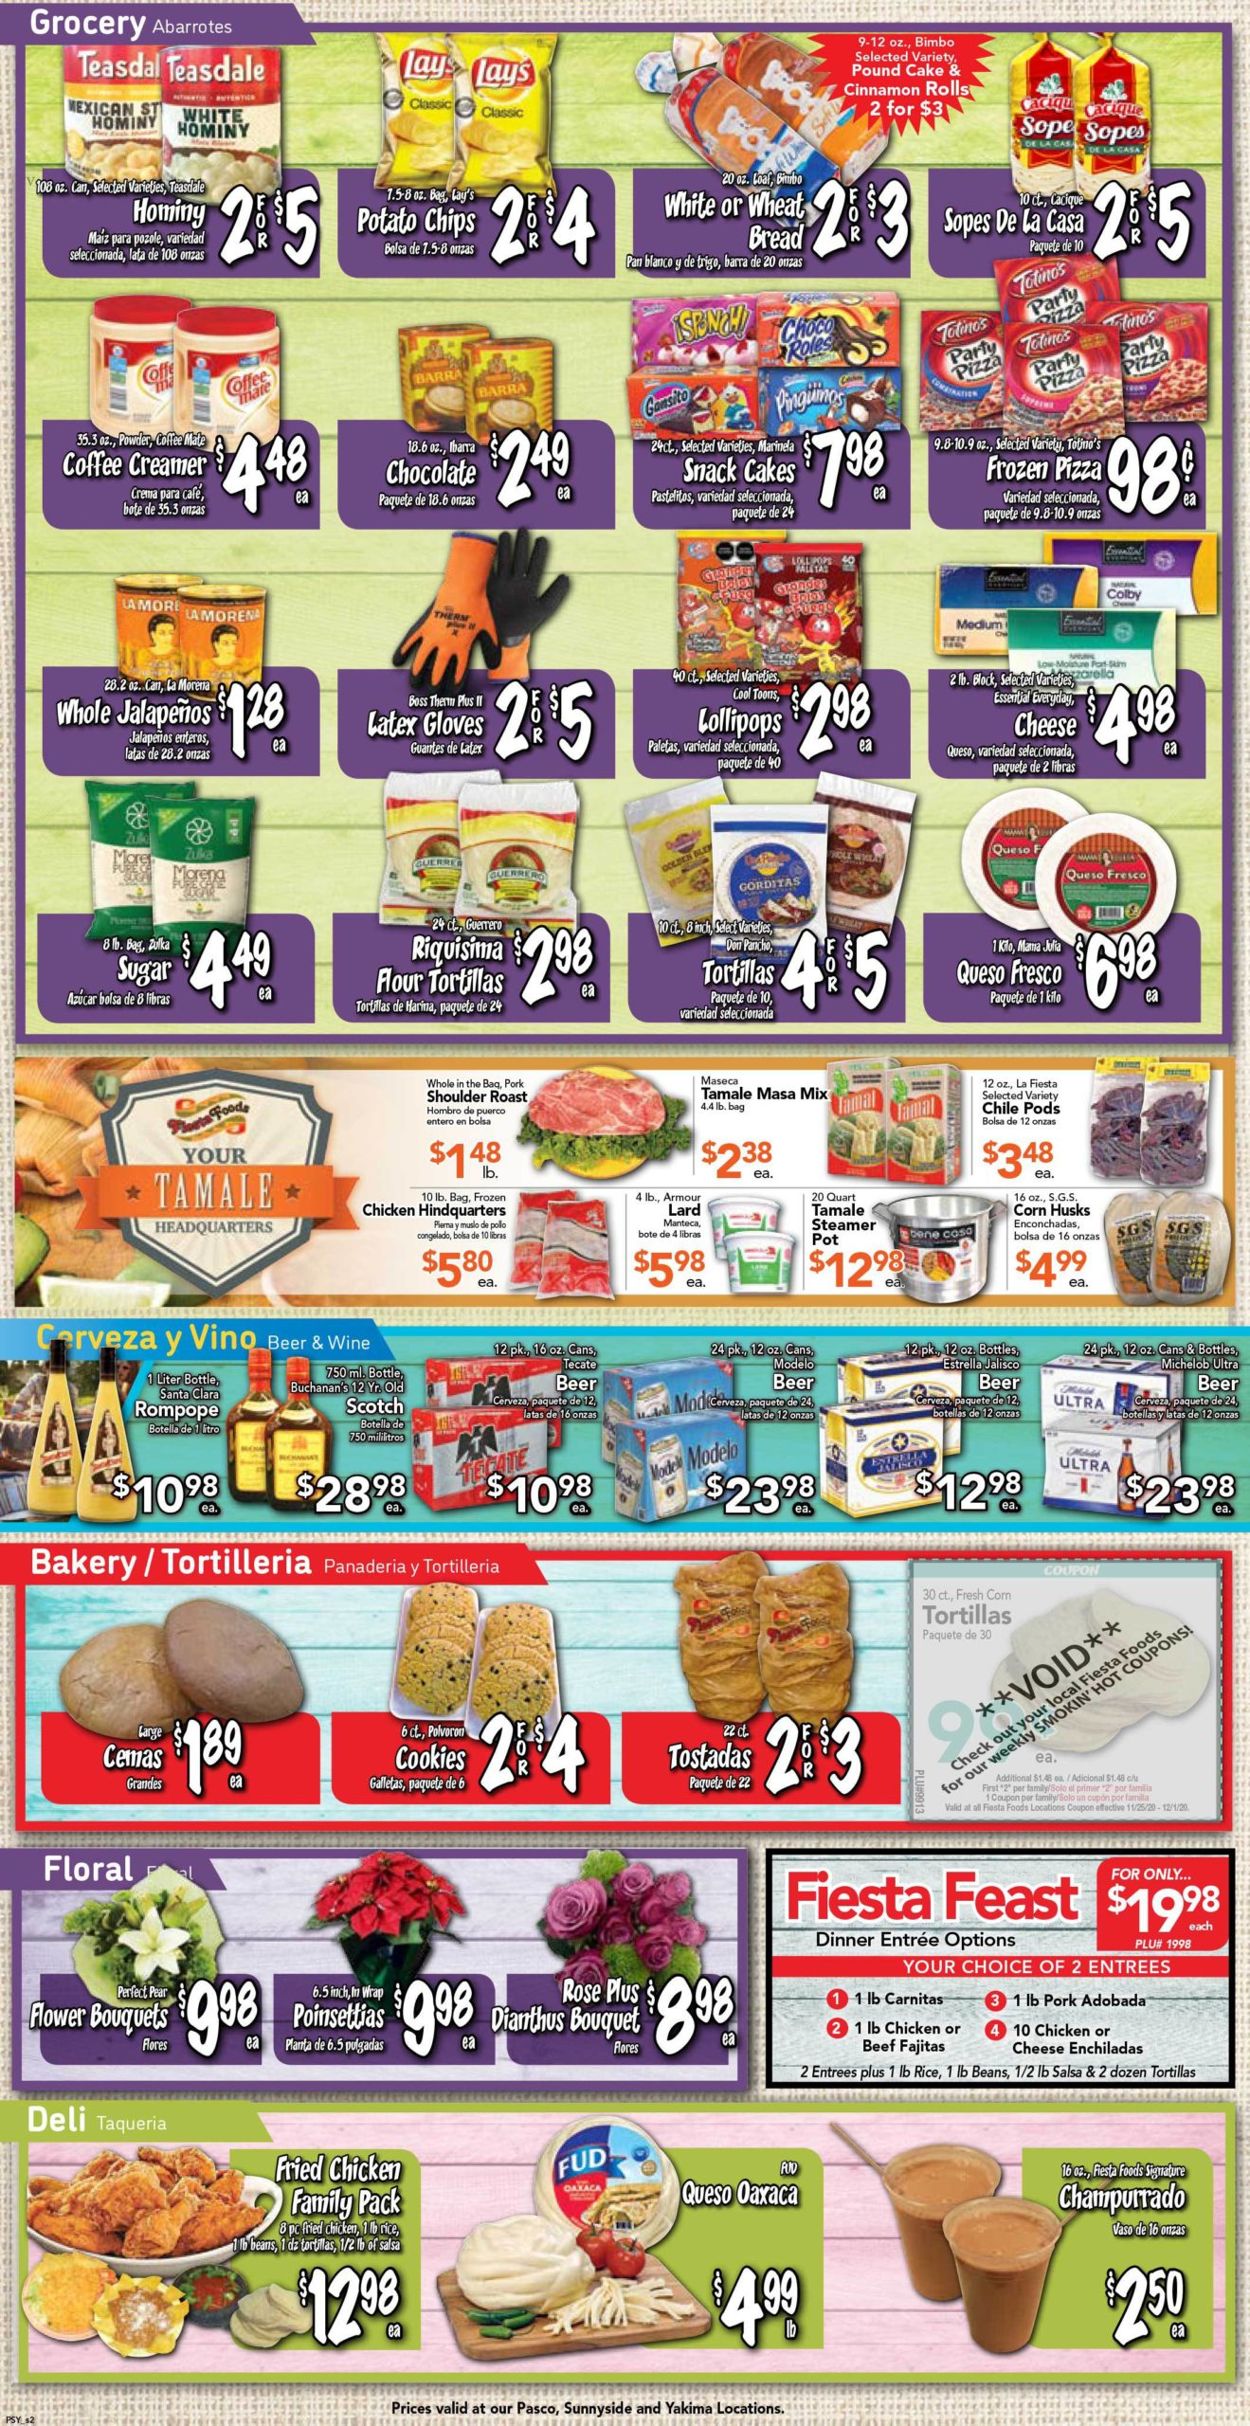 Fiesta Foods SuperMarkets Thanksgiving 2020 Weekly Ad Circular - valid 11/25-12/01/2020 (Page 2)